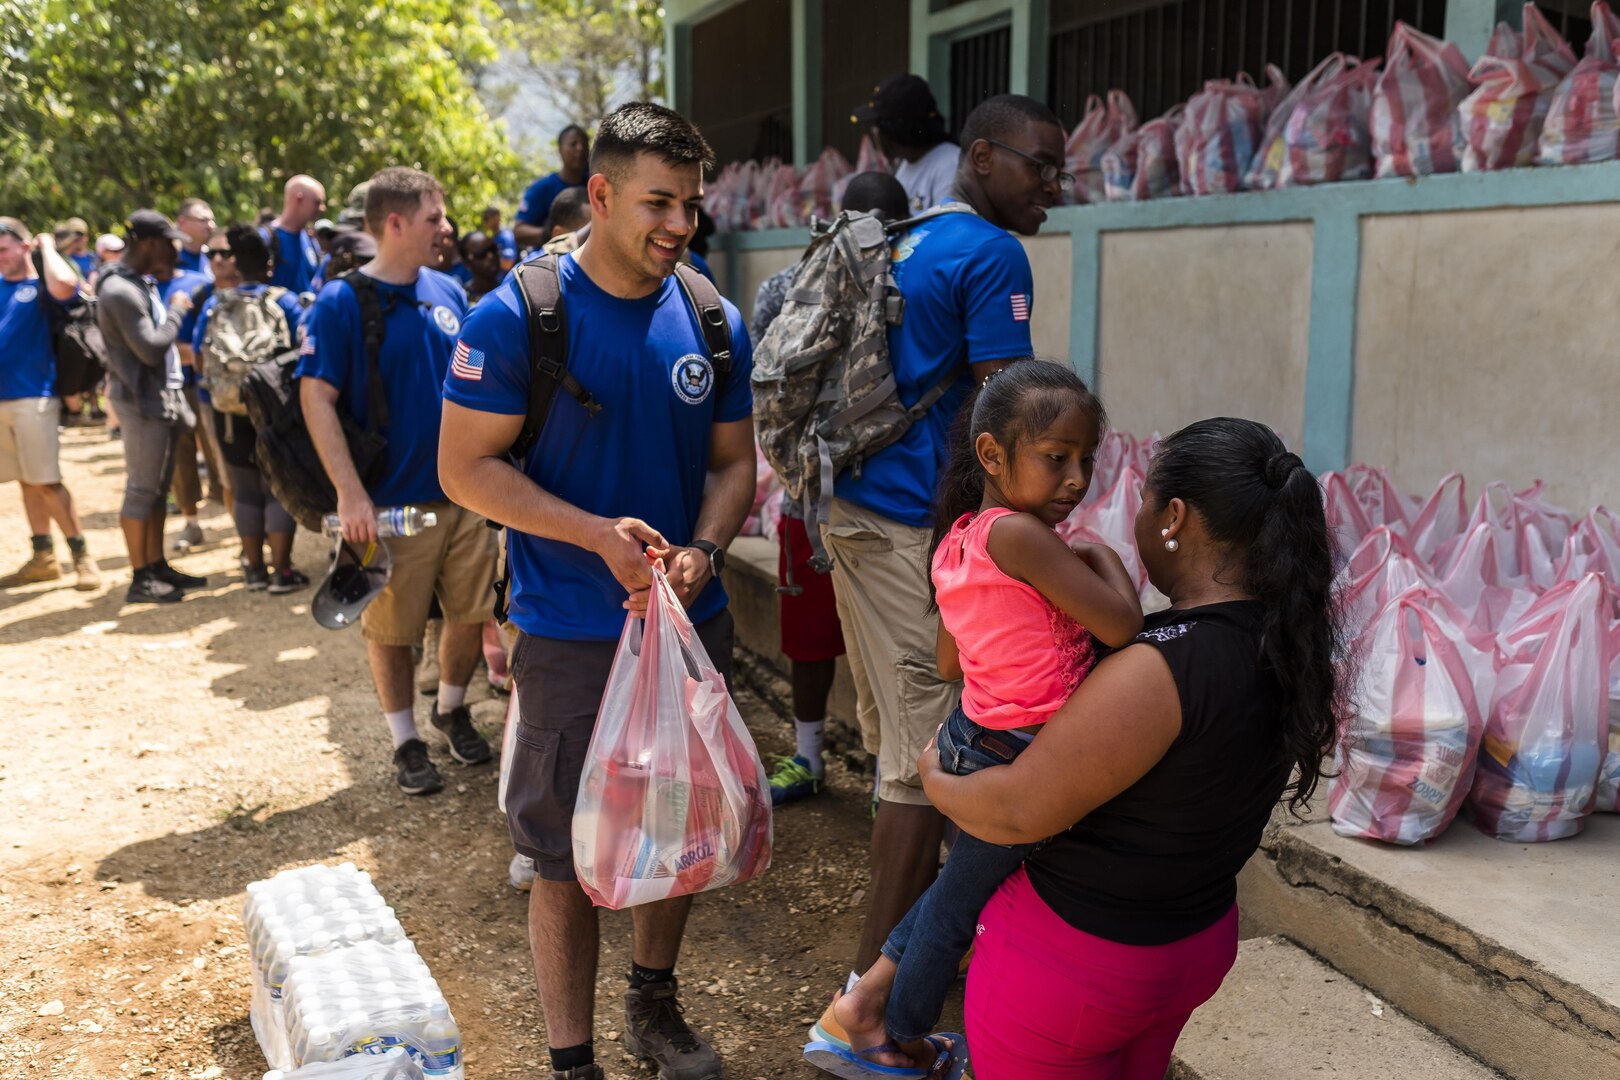 Villagers of San Jerónimo, Comayagua, Honduras receive bags of food from more than 190 members of Joint Task Force-Bravo to hiked approximately 3.6 miles round-trip to the village, Apr. 29, 2017. Members carried more than 5025 lbs of food and supplies, 24 soccer balls and 3 piñatas to the people of San Jerónimo. Chapel hikes have been occurring since 2003, with the JTF-Bravo Chapel sponsoring an average of six every year. The hikes are designed to provide a practical way for JTF-Bravo members to engage and partner with local communities to provide support to surrounding villages in need of food and supplies. (U.S. Air National Guard photo by Master Sgt. Scott Thompson/released)